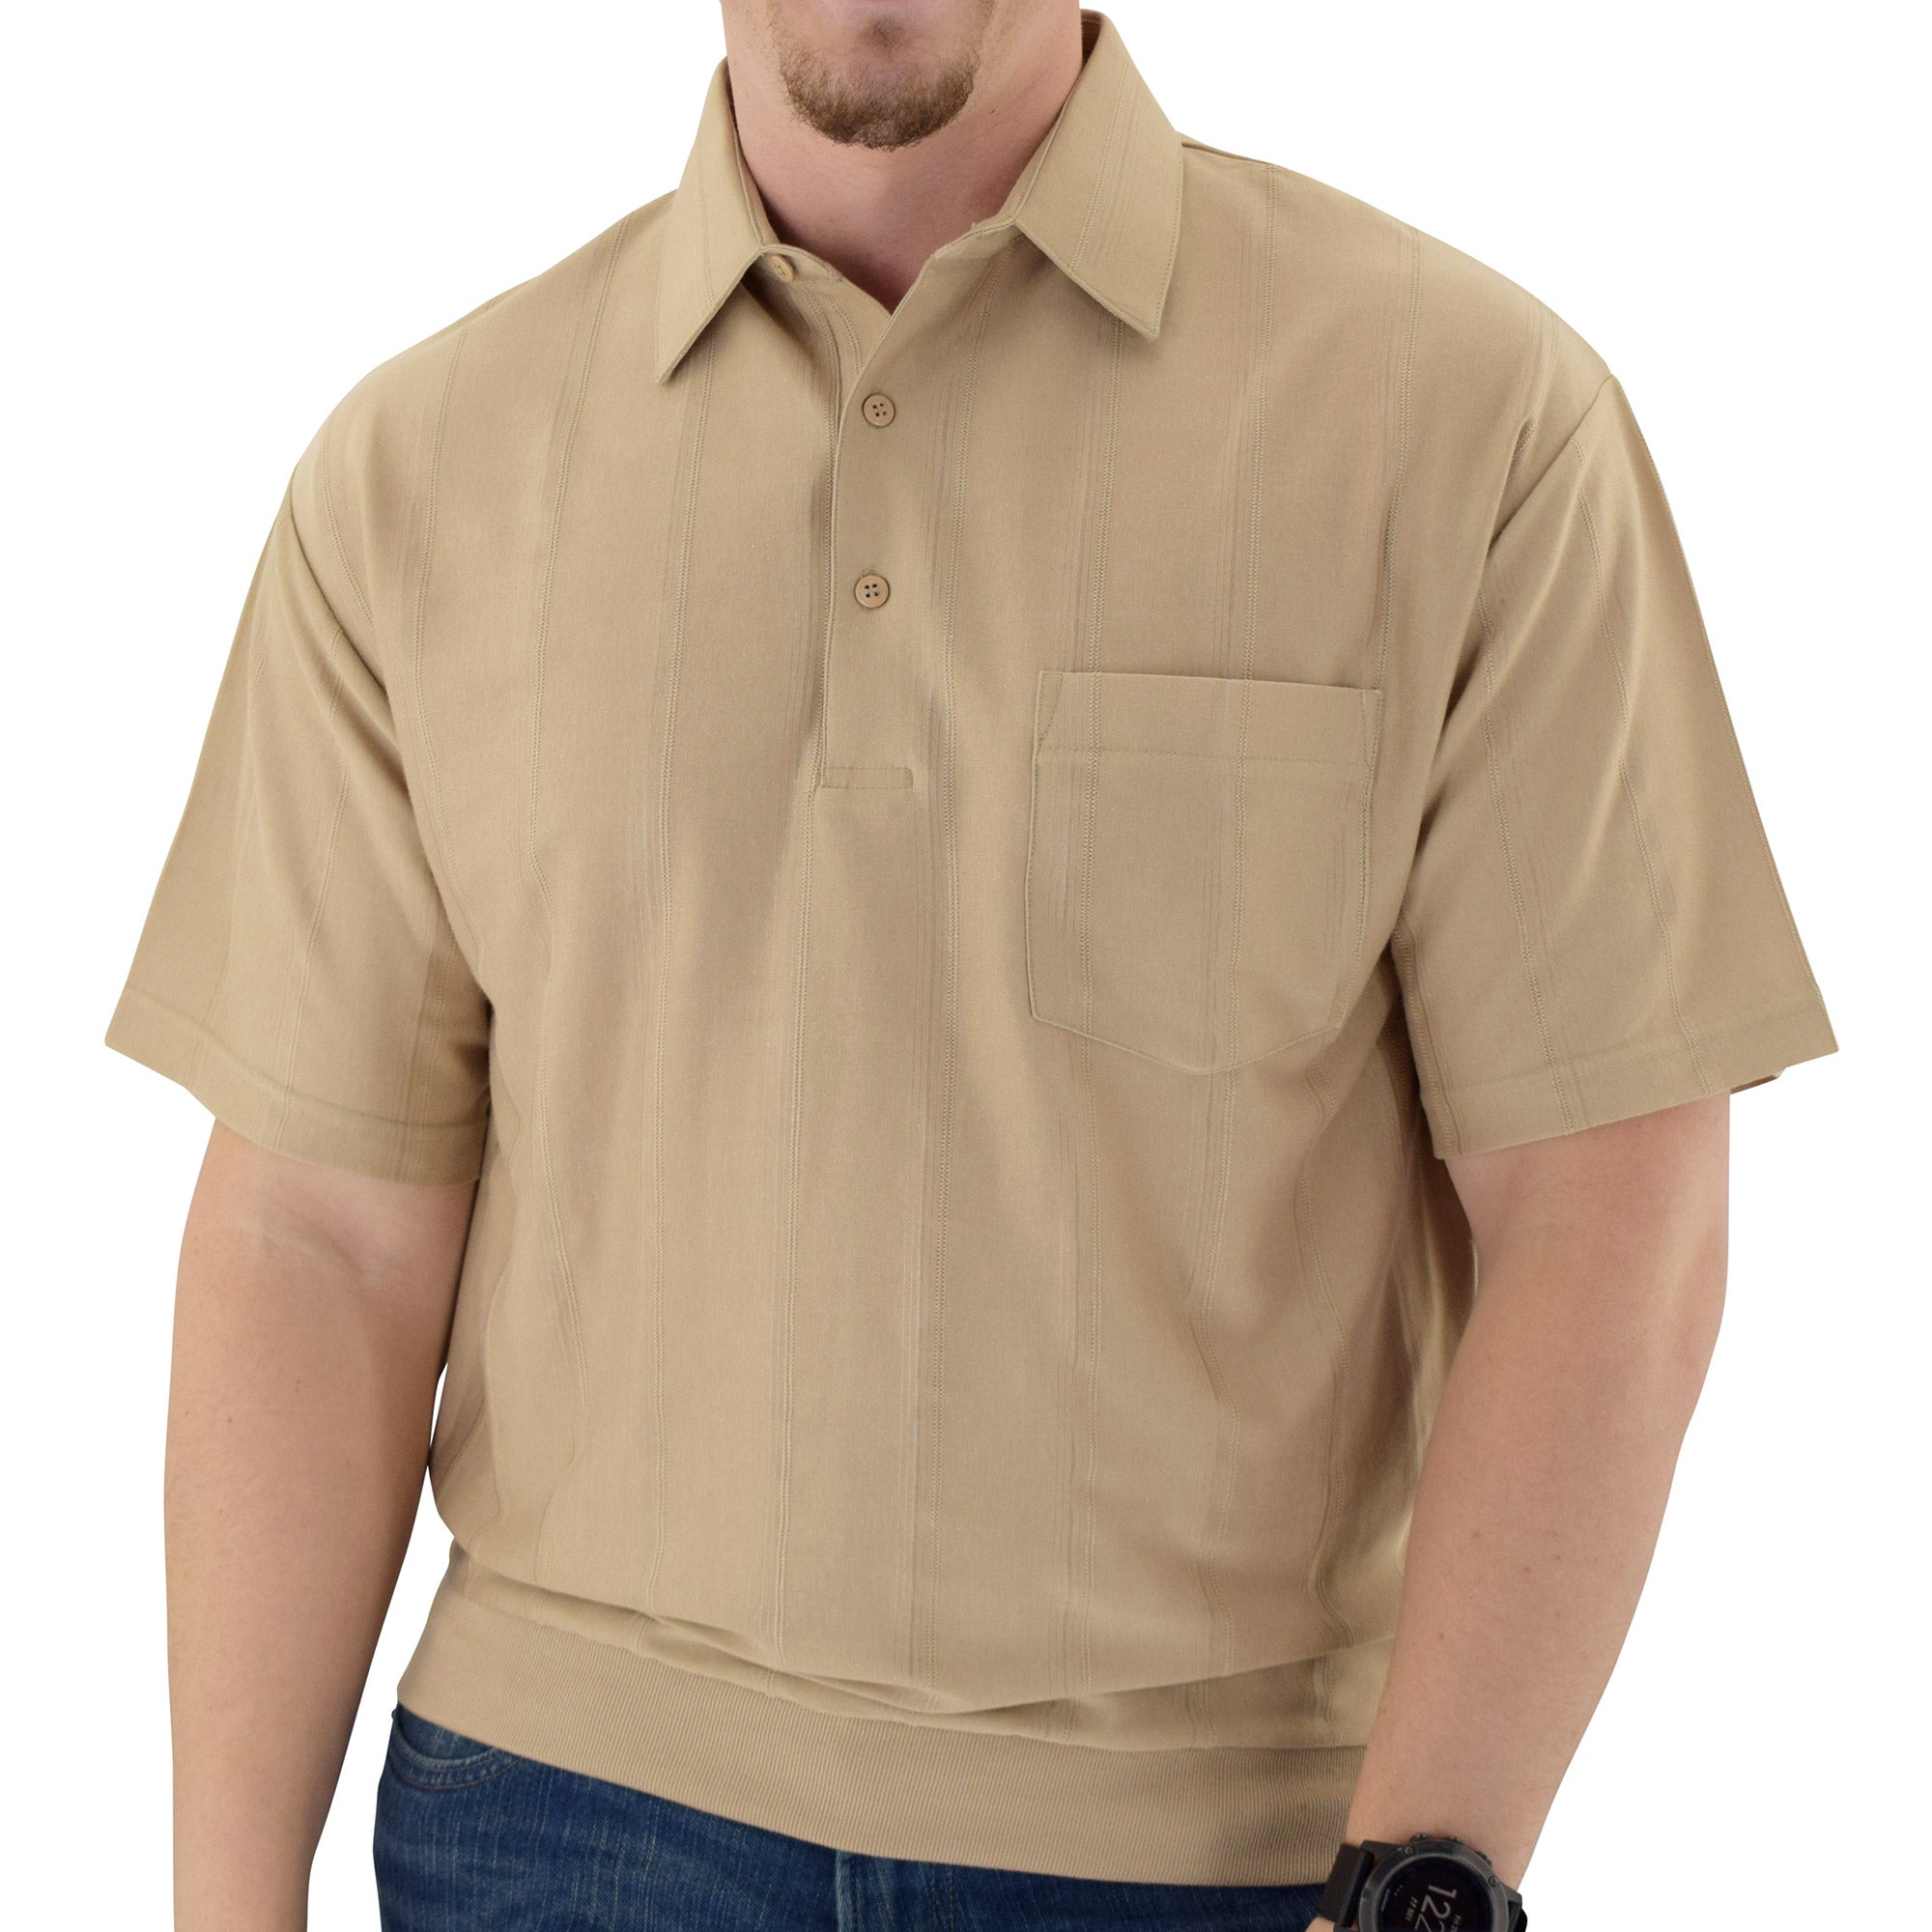 Big and Tall Tone on Tone Textured Knit Short Sleeve Banded Bottom Shirt - 6010-16BT - Taupe - bandedbottom